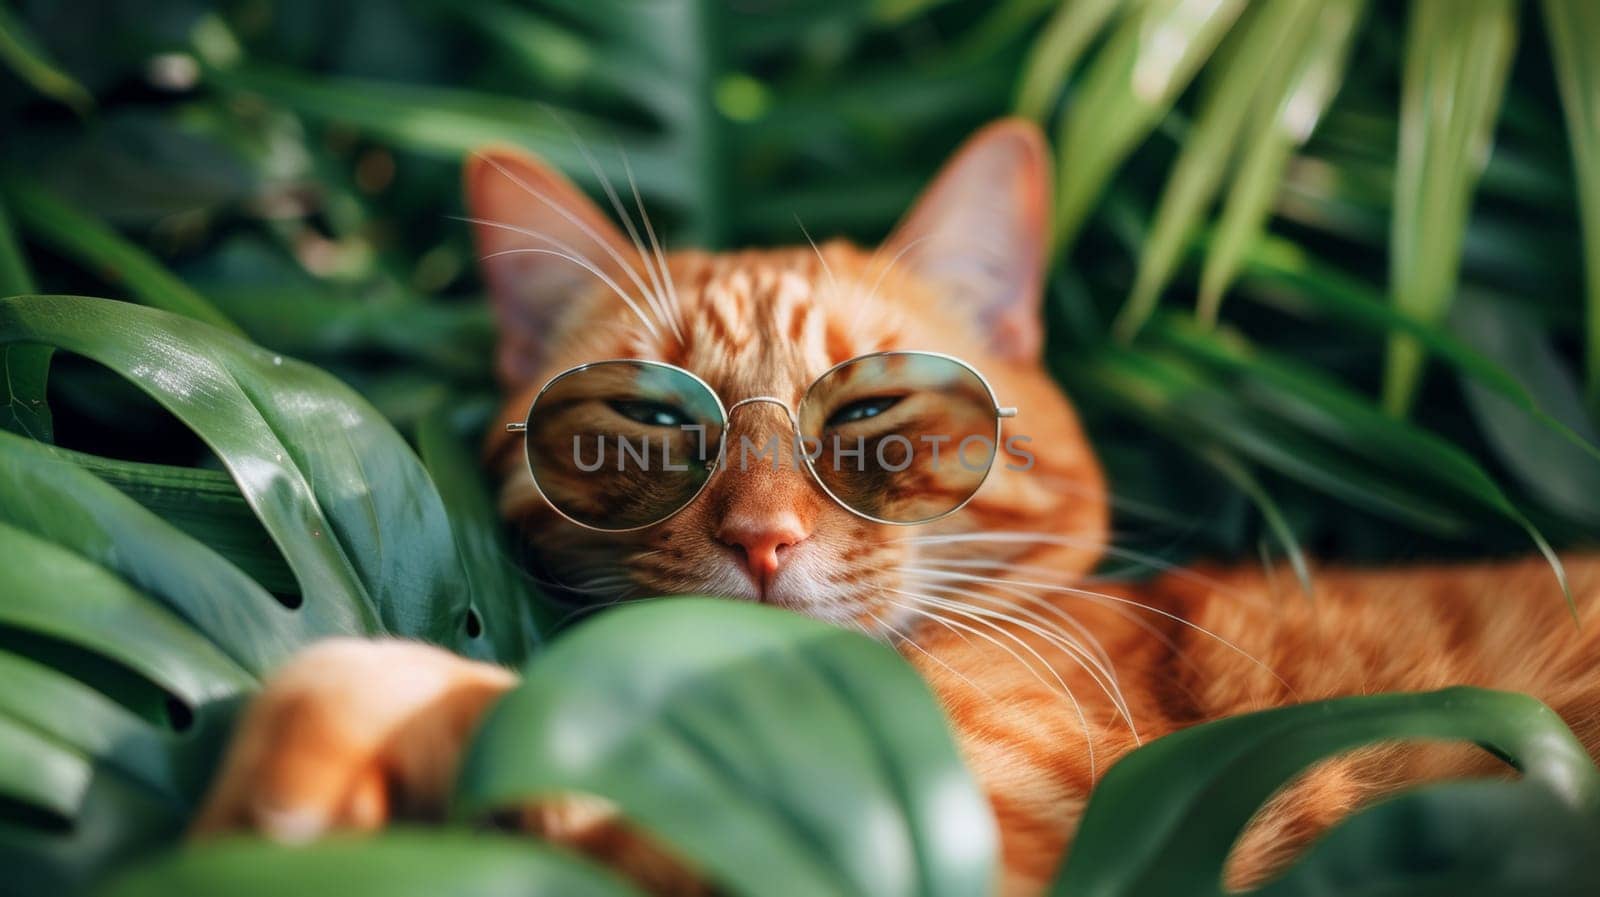 A cat wearing sunglasses laying in a green leafy plant